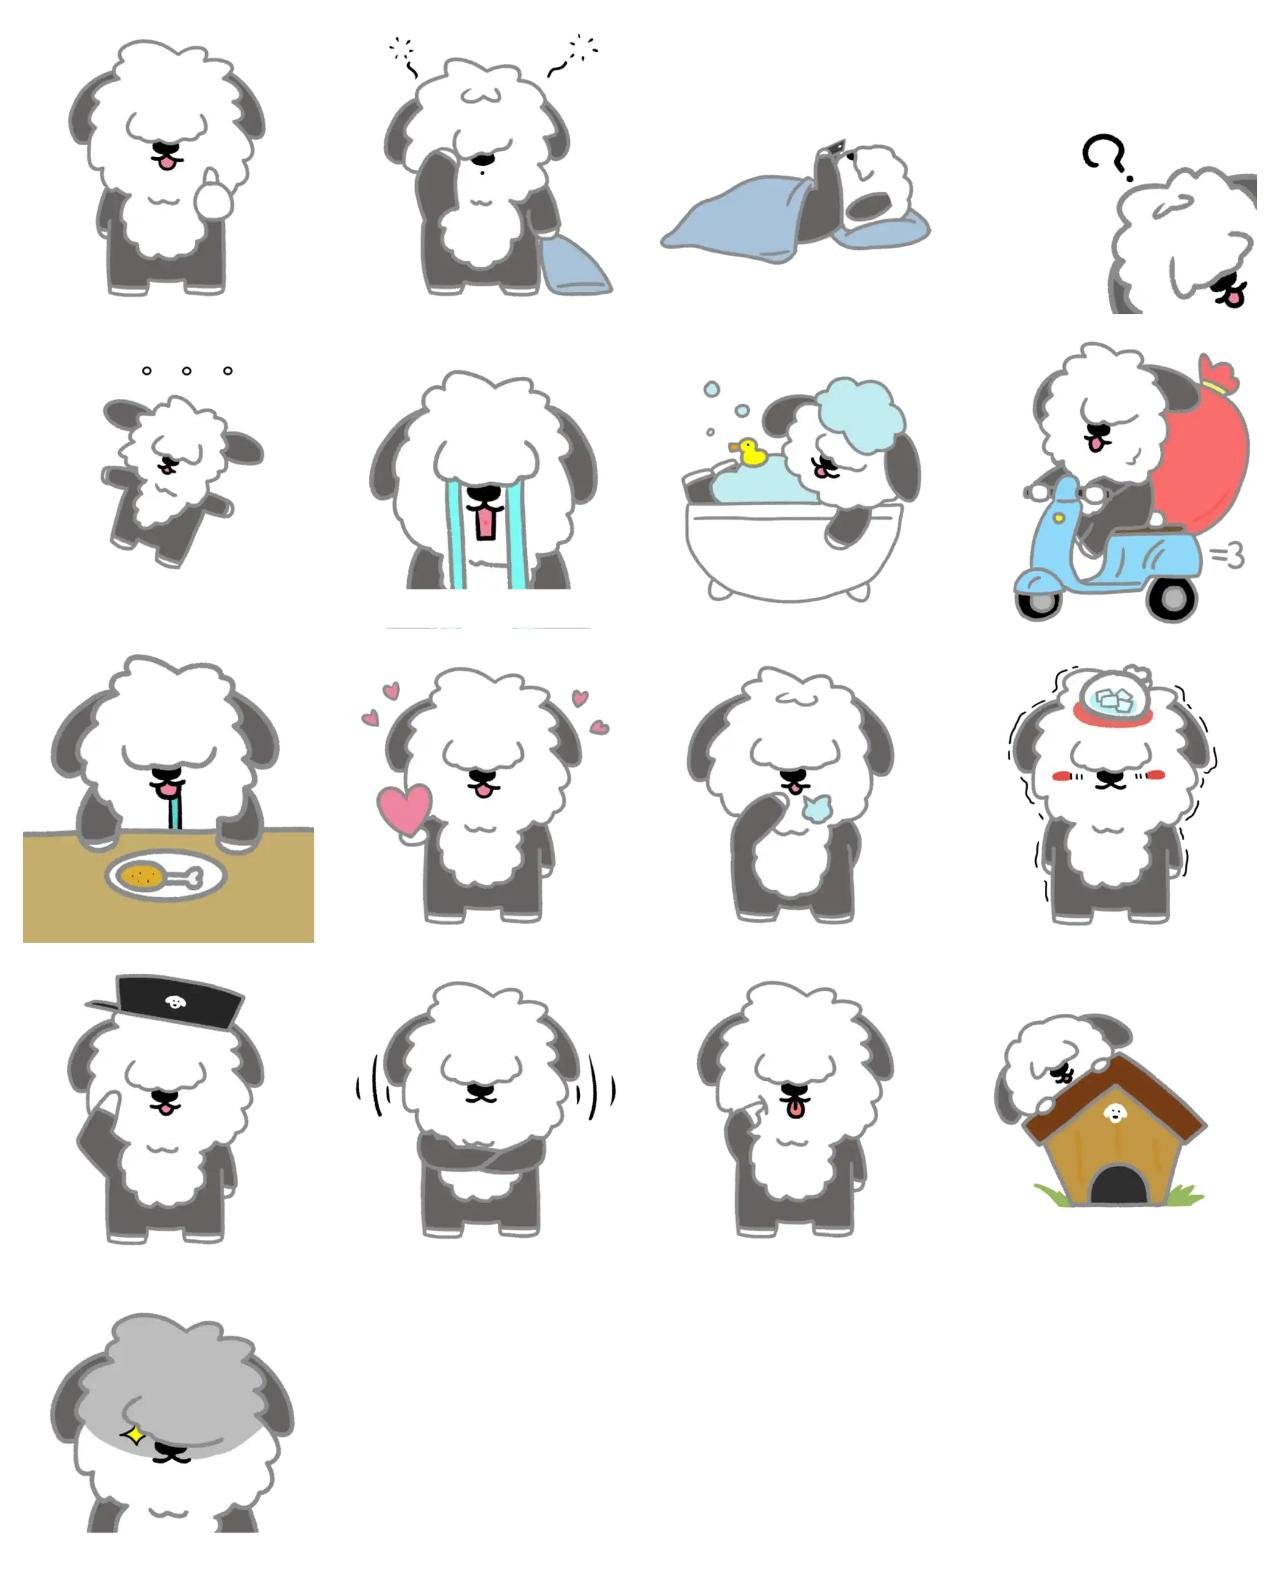 Mongdang Animals,Romance sticker pack for Whatsapp, Telegram, Signal, and others chatting and message apps